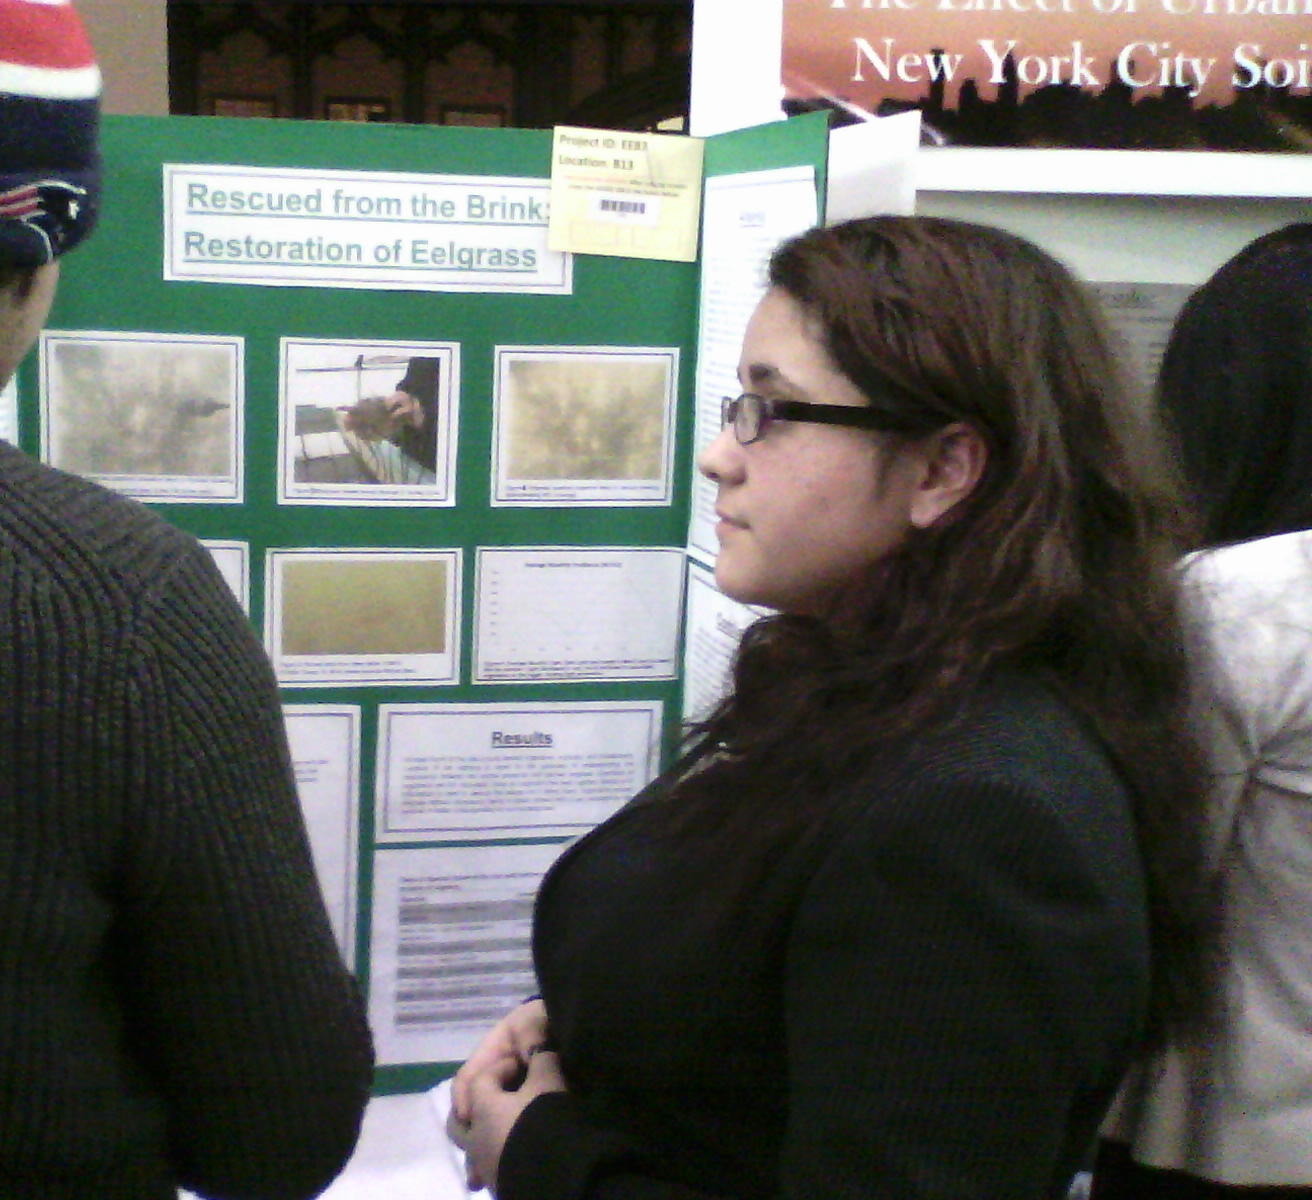 Nicolle presenting at the New York City Science and Engineering Fair this past Sunday, March 1st.